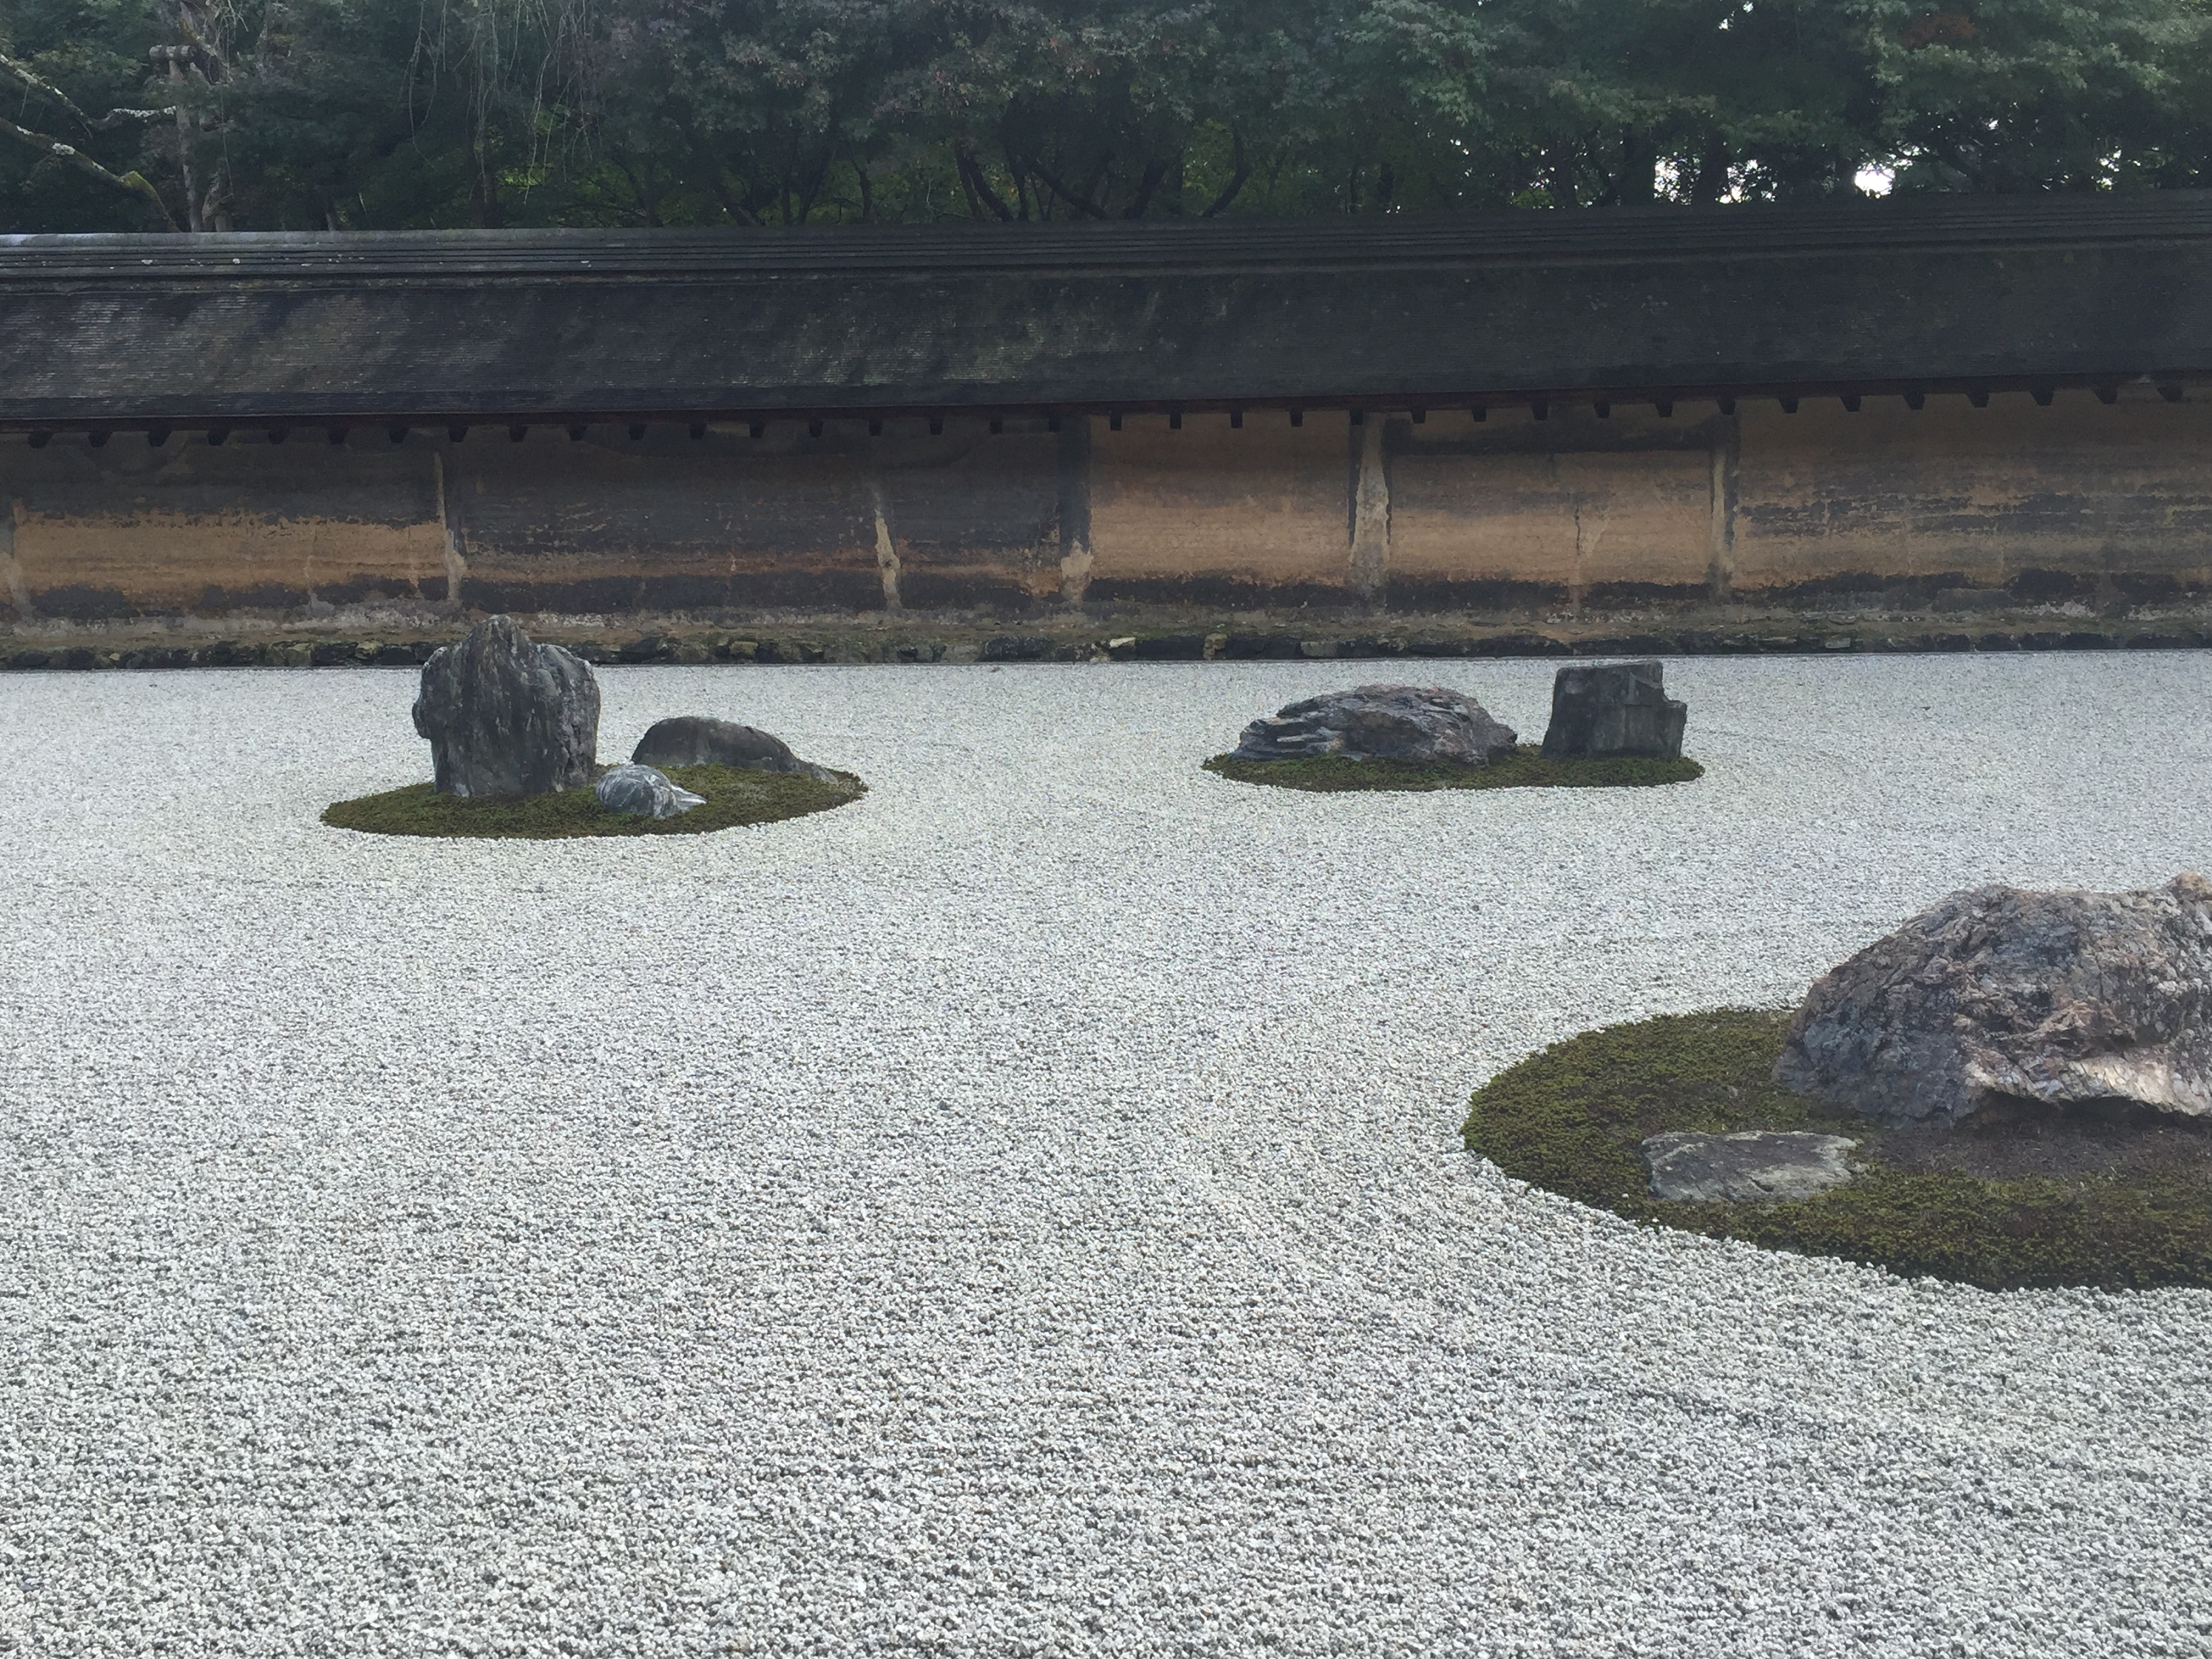 Demystifying the Ryoanji Temple in Kyoto 龍安寺